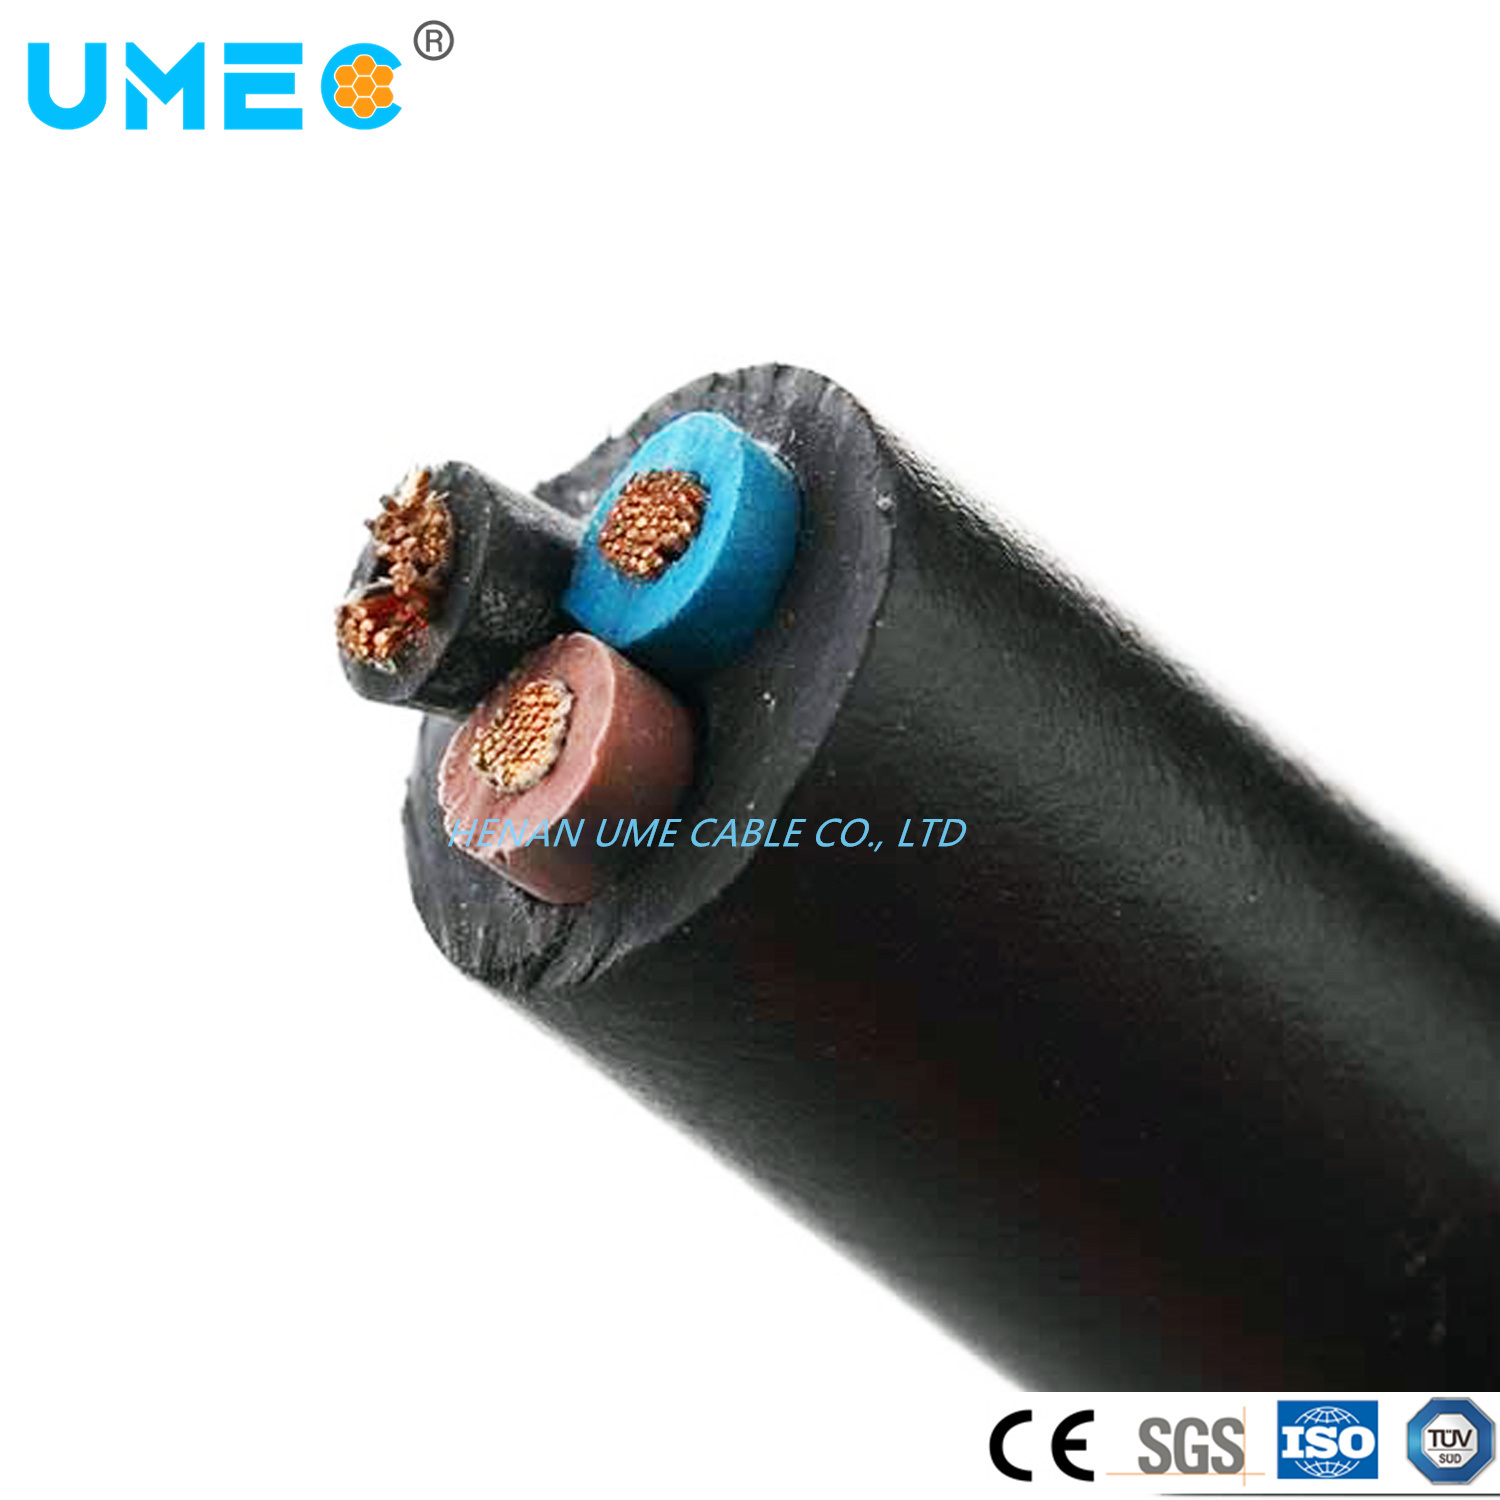 300/500V 450/750V Rubber Insulation Sheathed Flexible Stranded Copper H05bb-F/H07bb-F Electric Cable